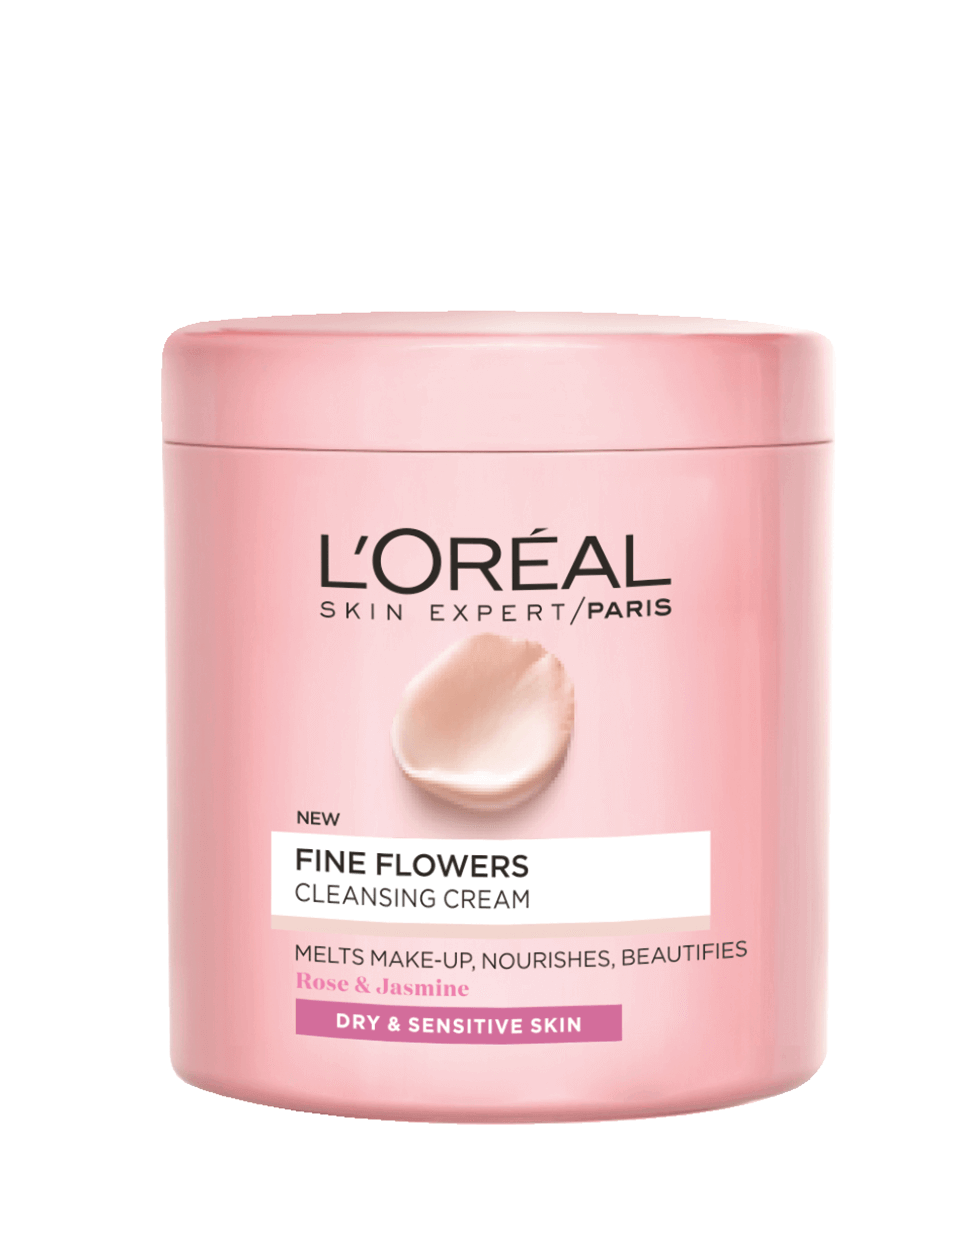 l'oreal fine flowers cleansing cream